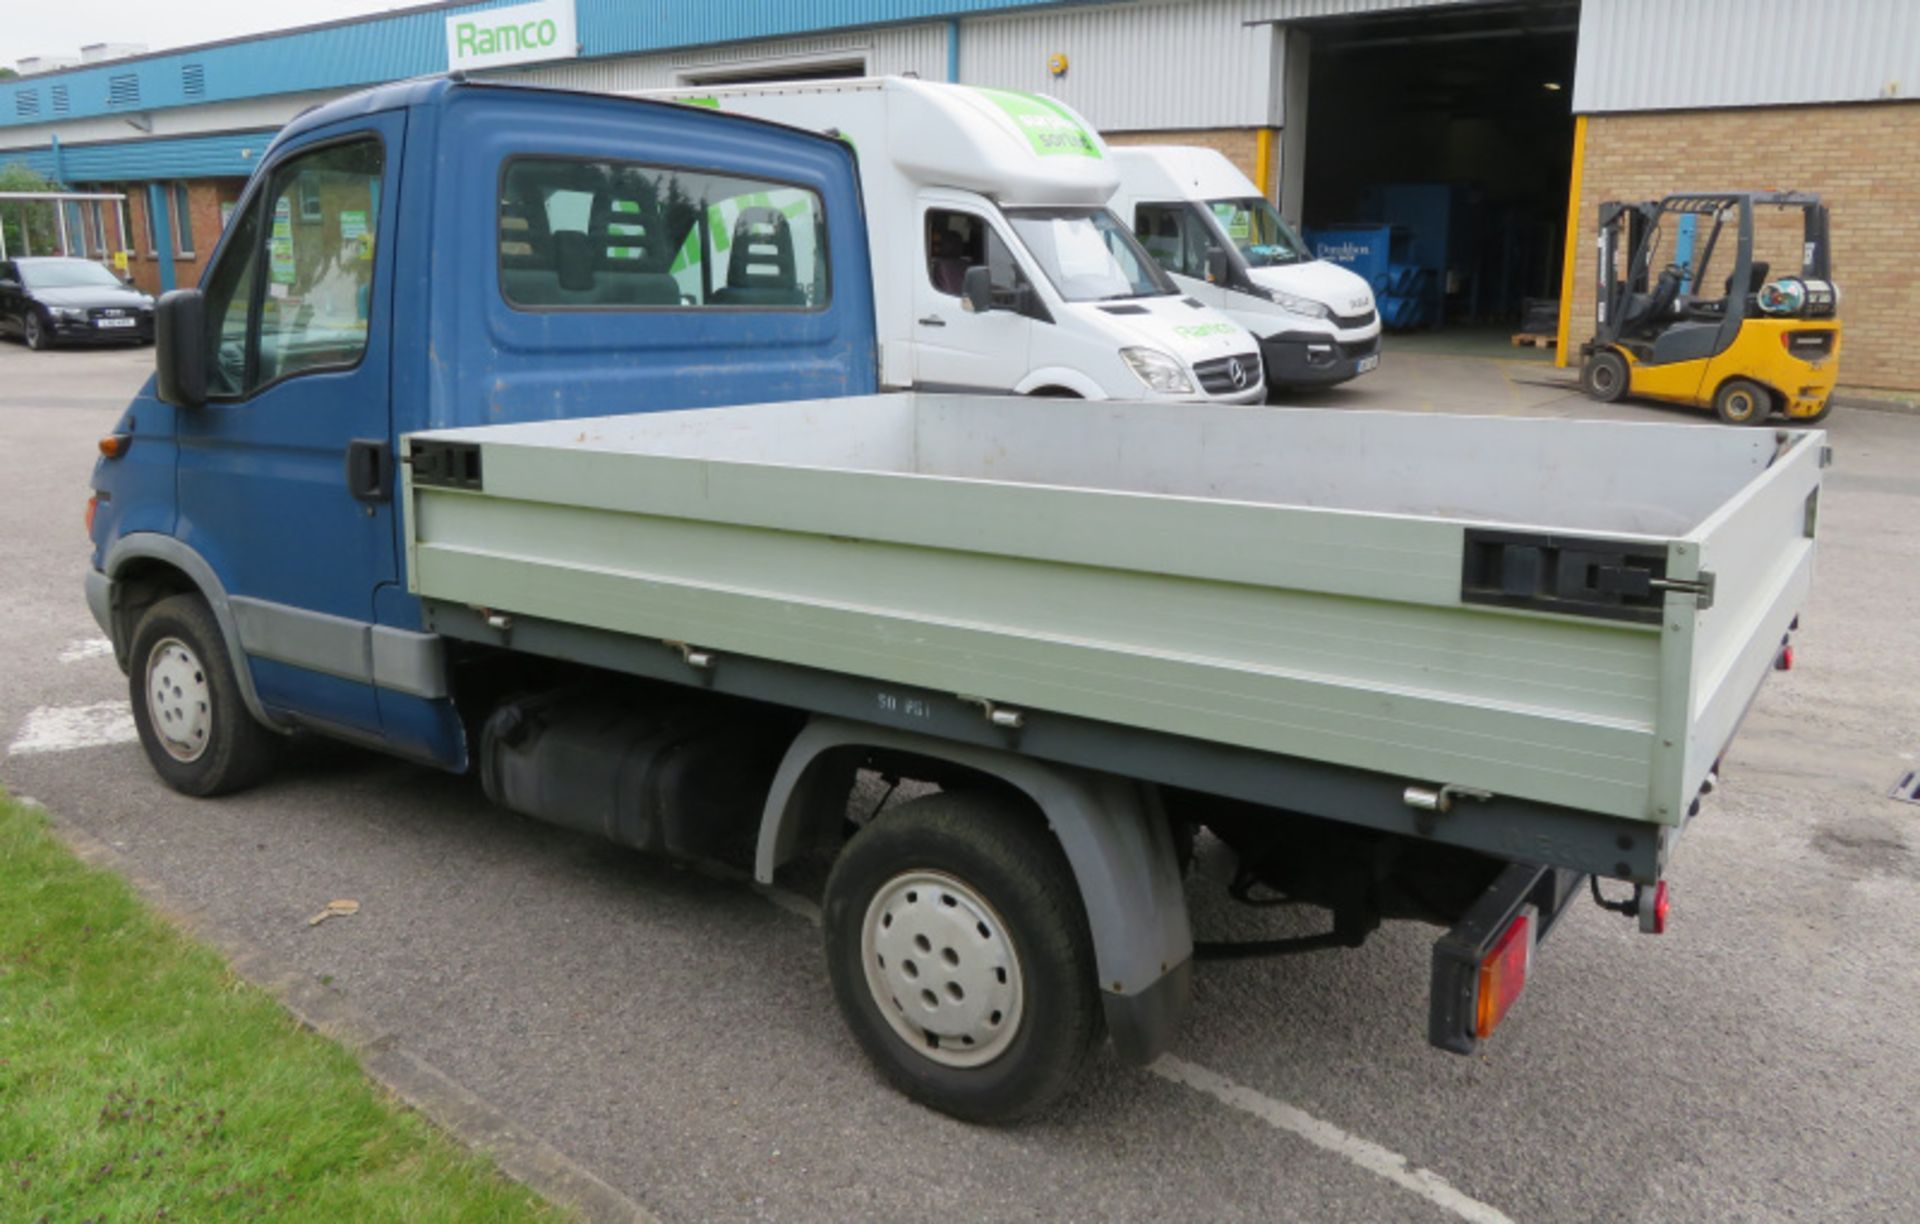 Iveco Daily drop side truck- 29L9 - diesel - year 2004 - 4 cylinder engine - Image 3 of 15